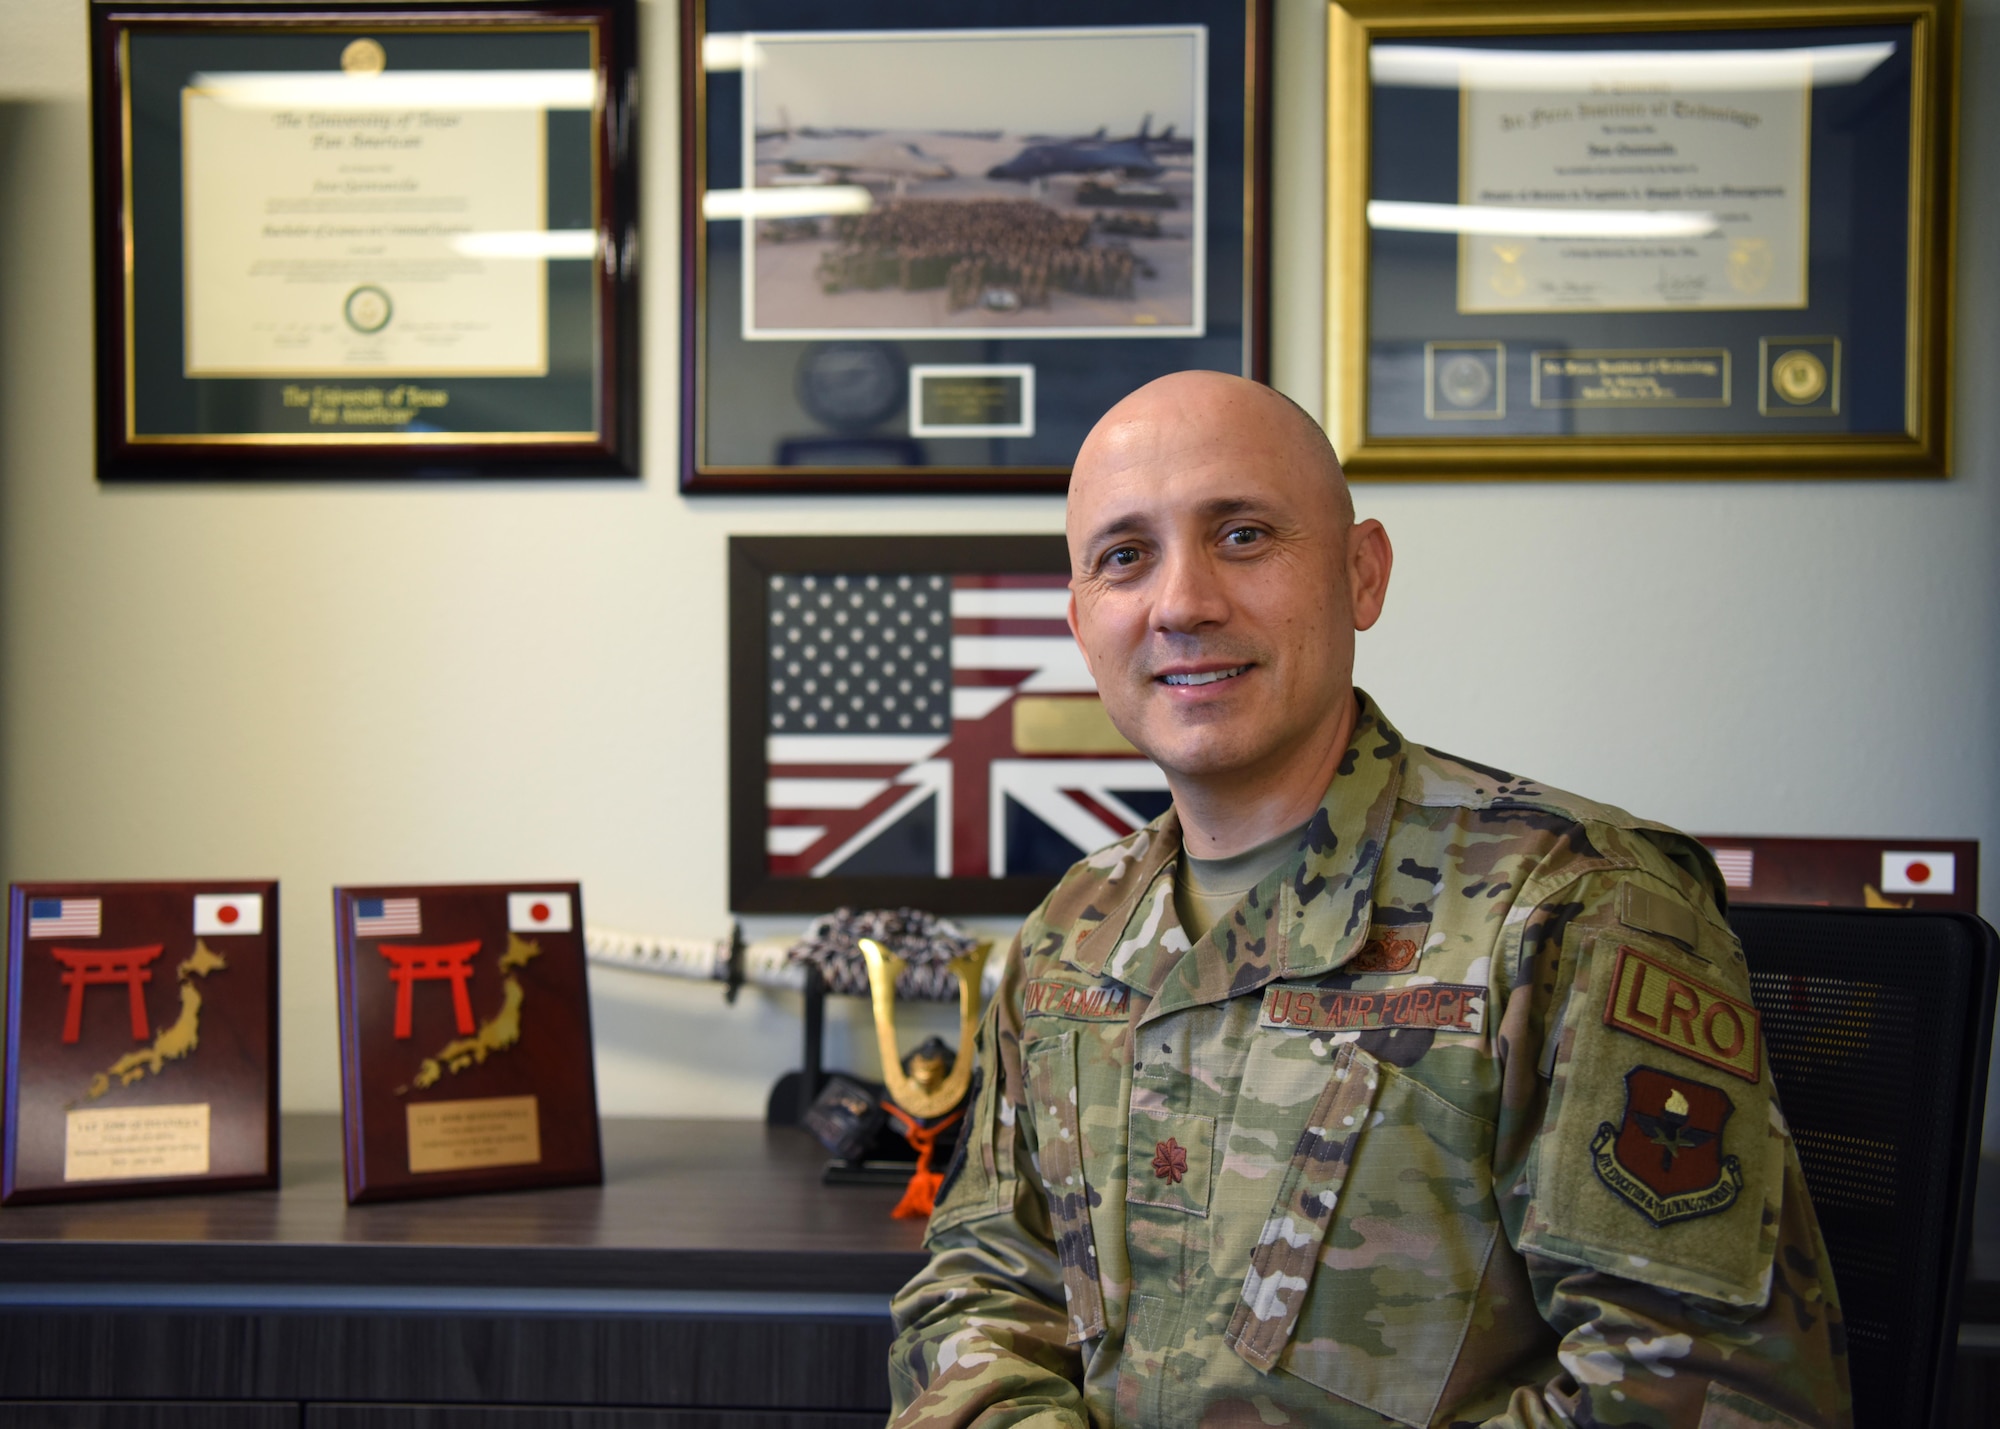 U.S. Air Force Maj. Jose Quintanilla, 17th Logistics Readiness Squadron commander, poses for a portrait in his office at Goodfellow Air Force Base, Texas, June 22, 2022. Quintanilla was stationed at seven previous bases before coming to Goodfellow. (U.S. Air Force photo by Senior Airman Ethan Sherwood)